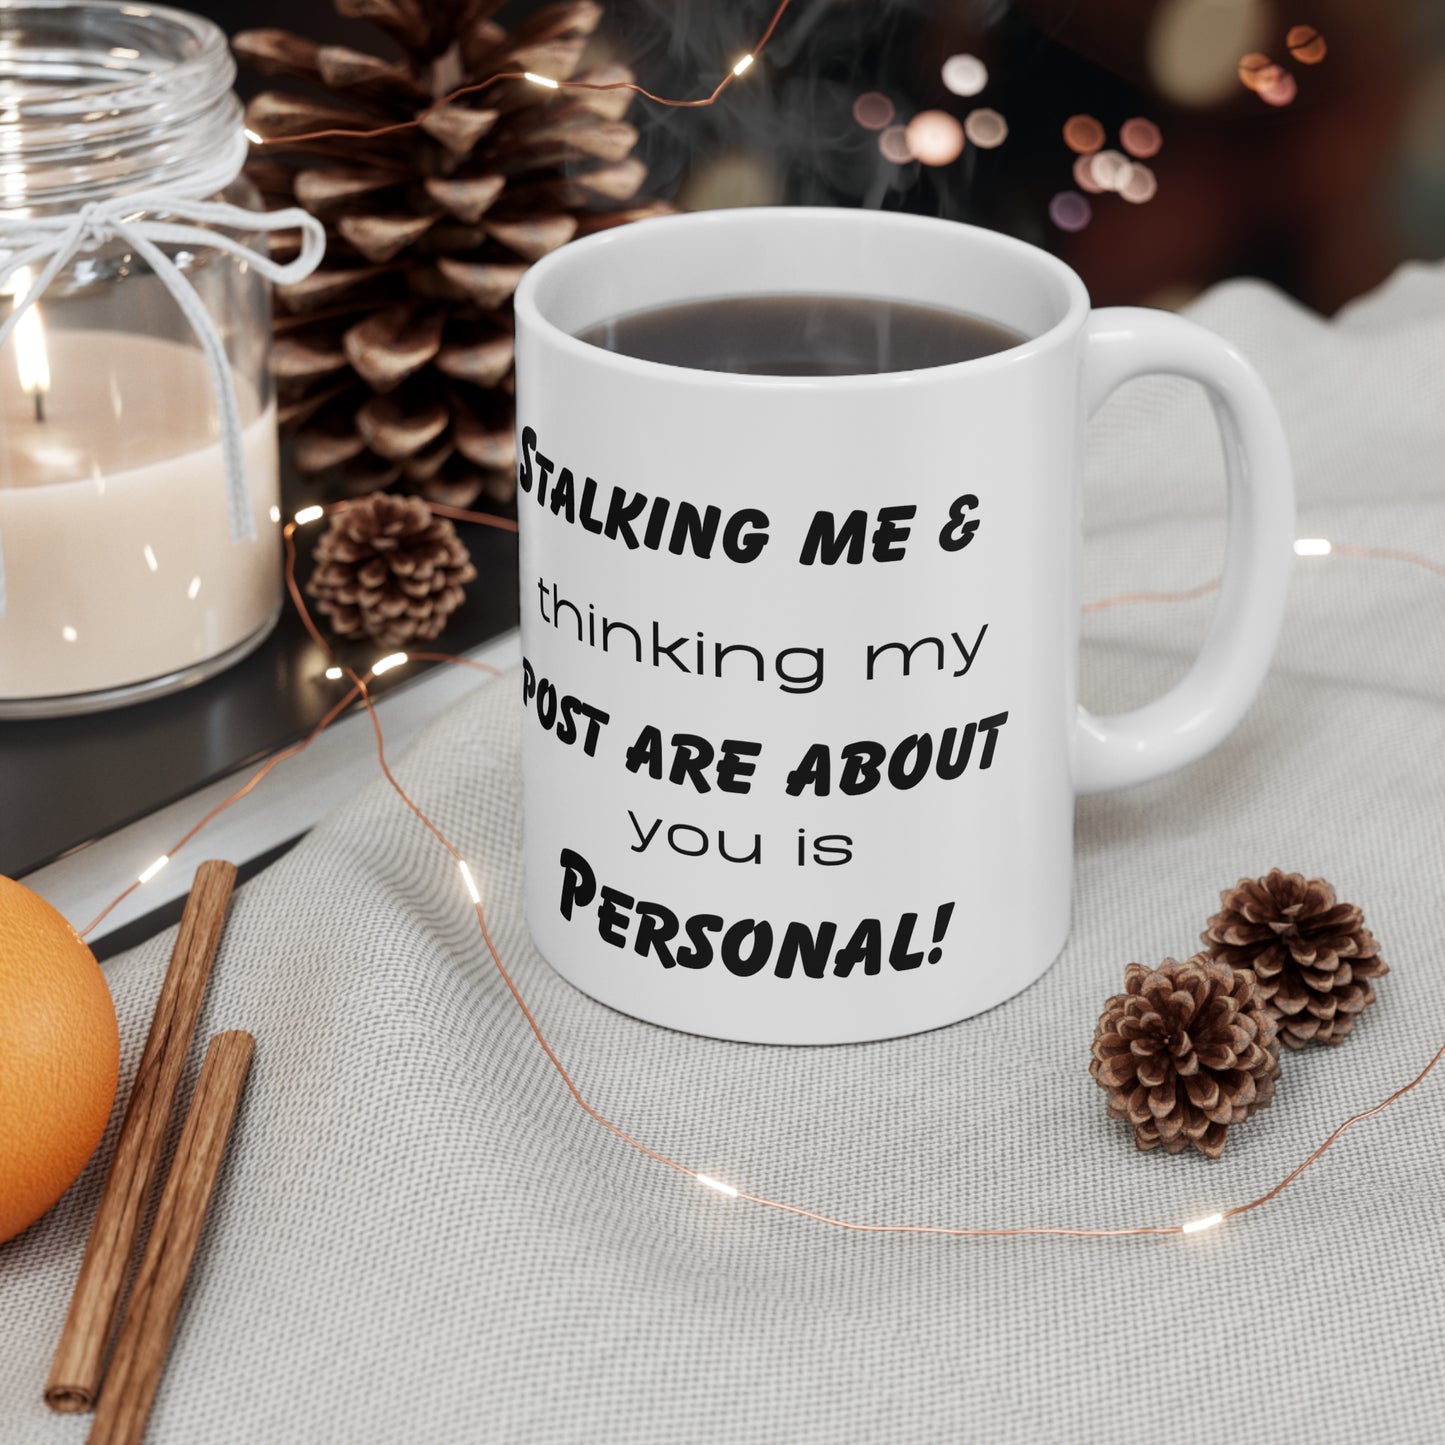 Stalking me and thinking my post are about you is personal! Ceramic Mug 11oz